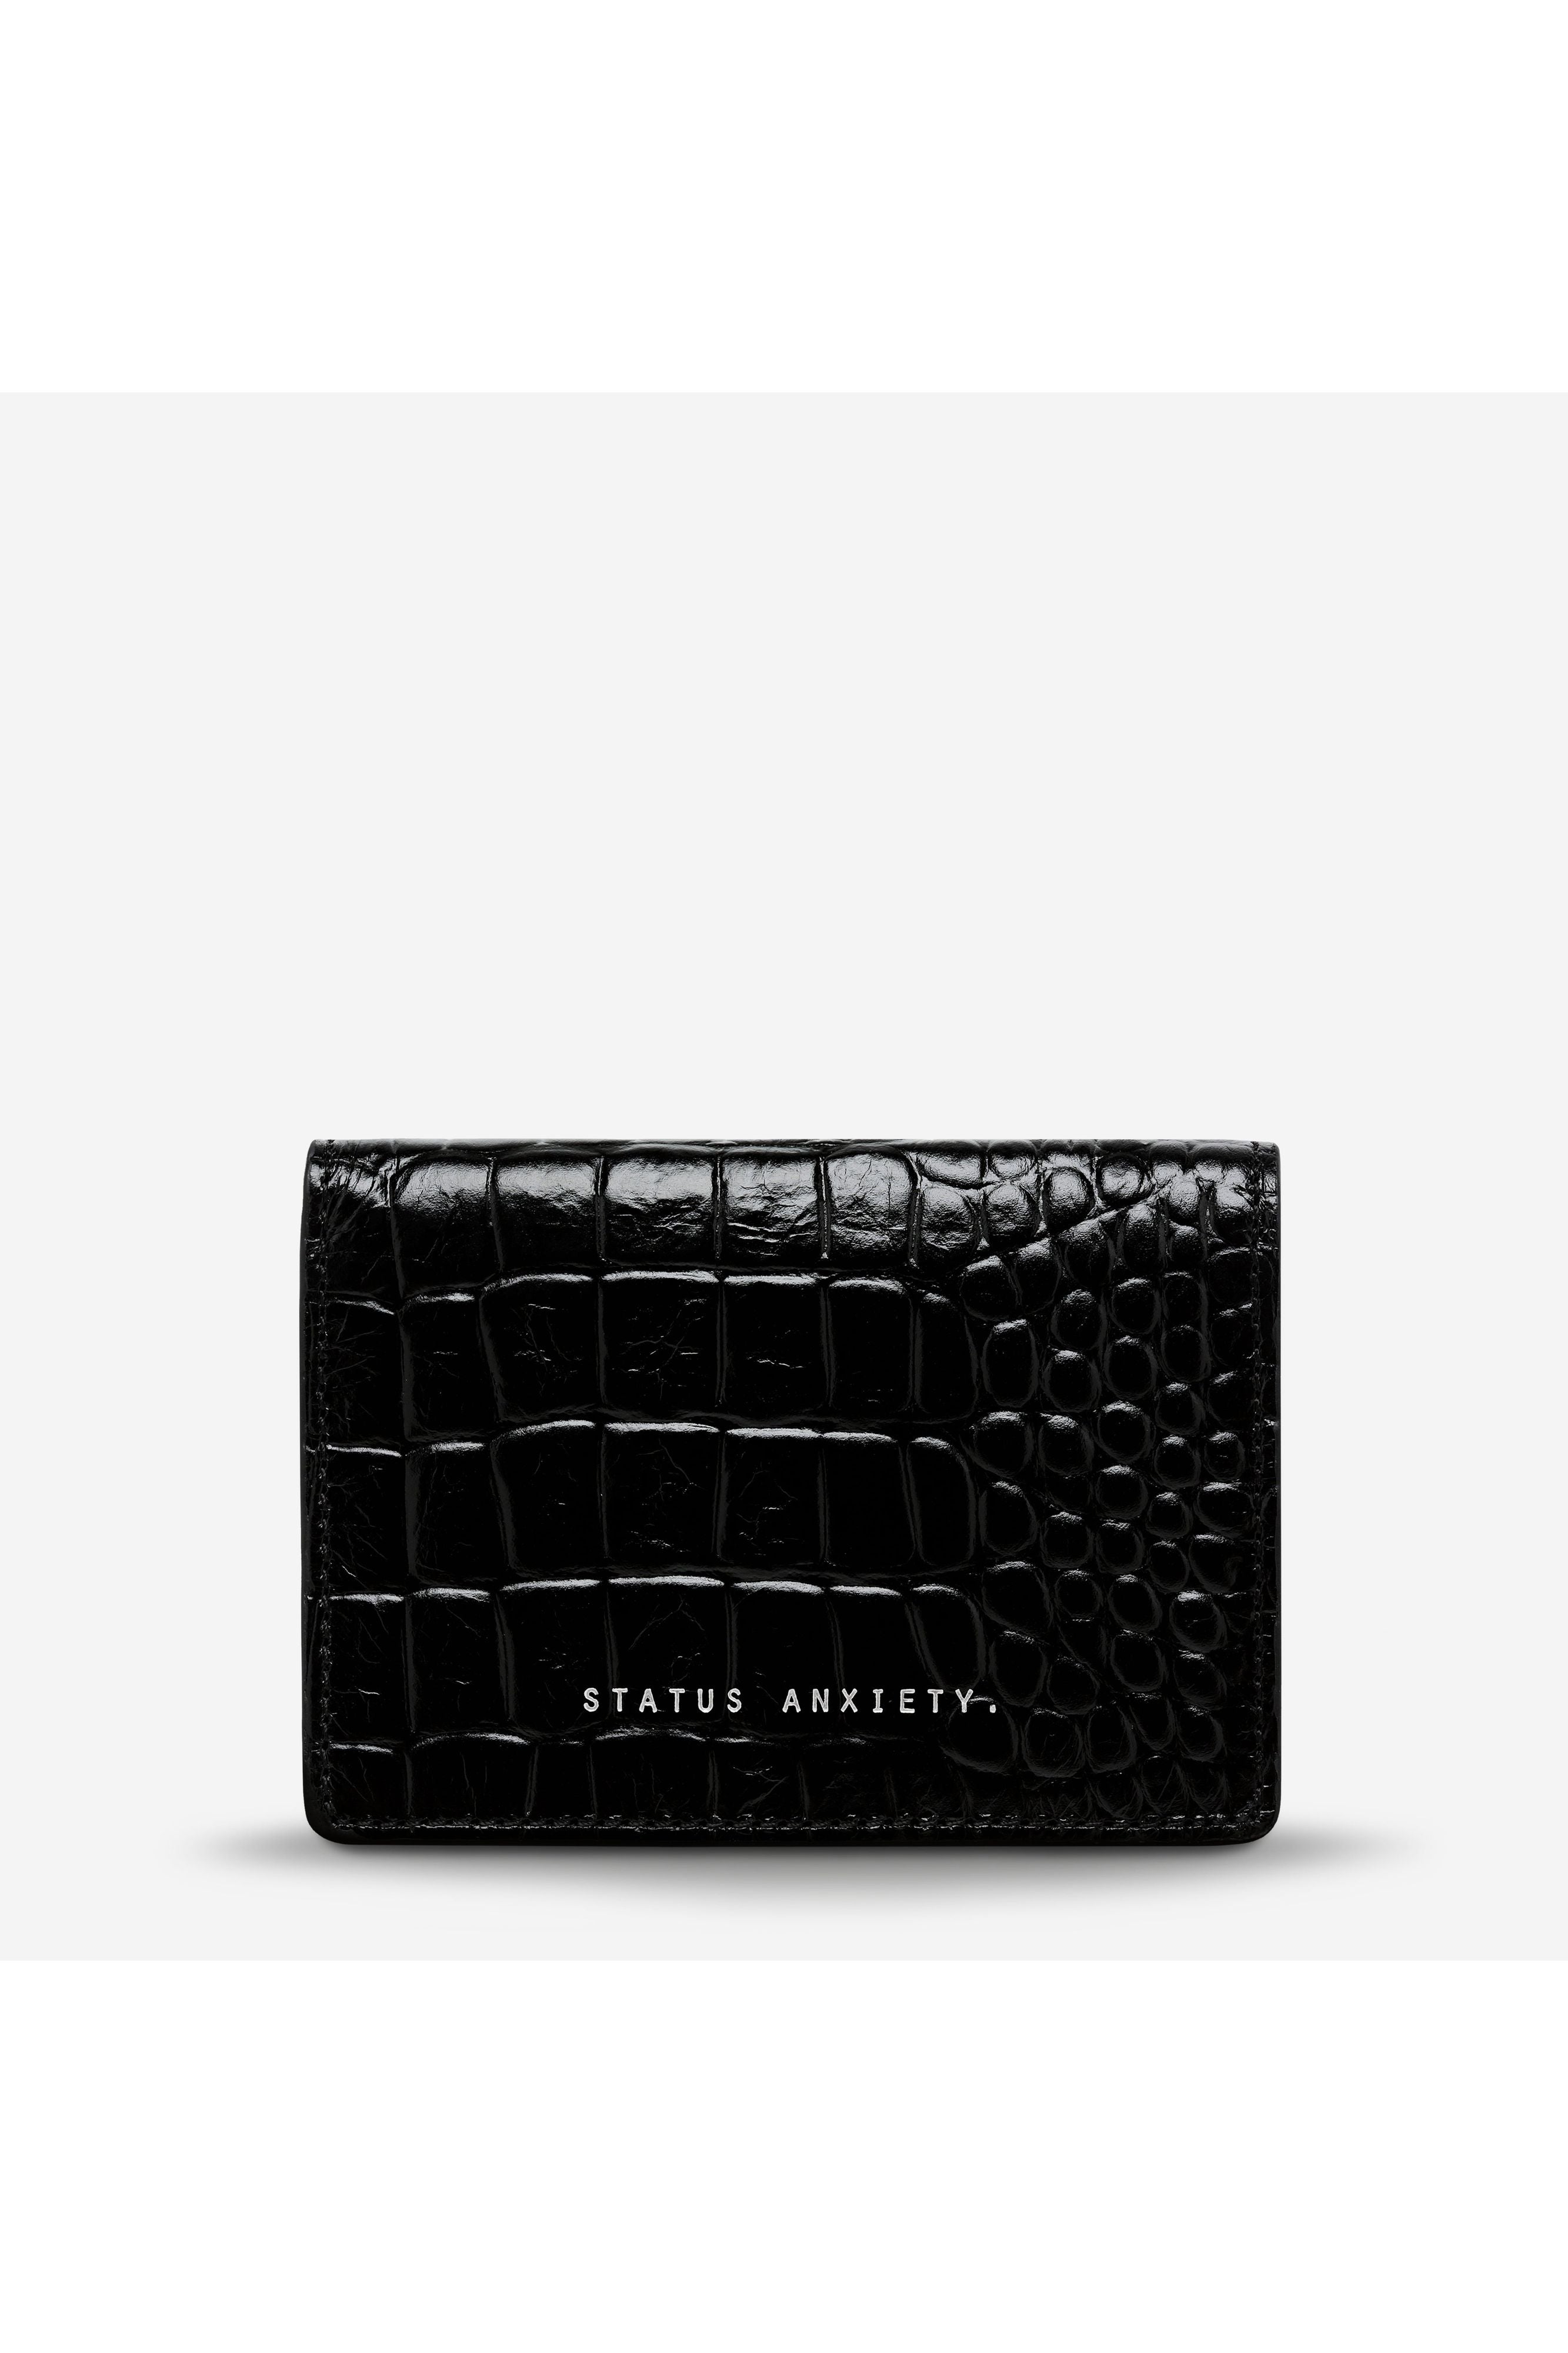 Status Anxiety - Easy Does It - Black Croc Emboss